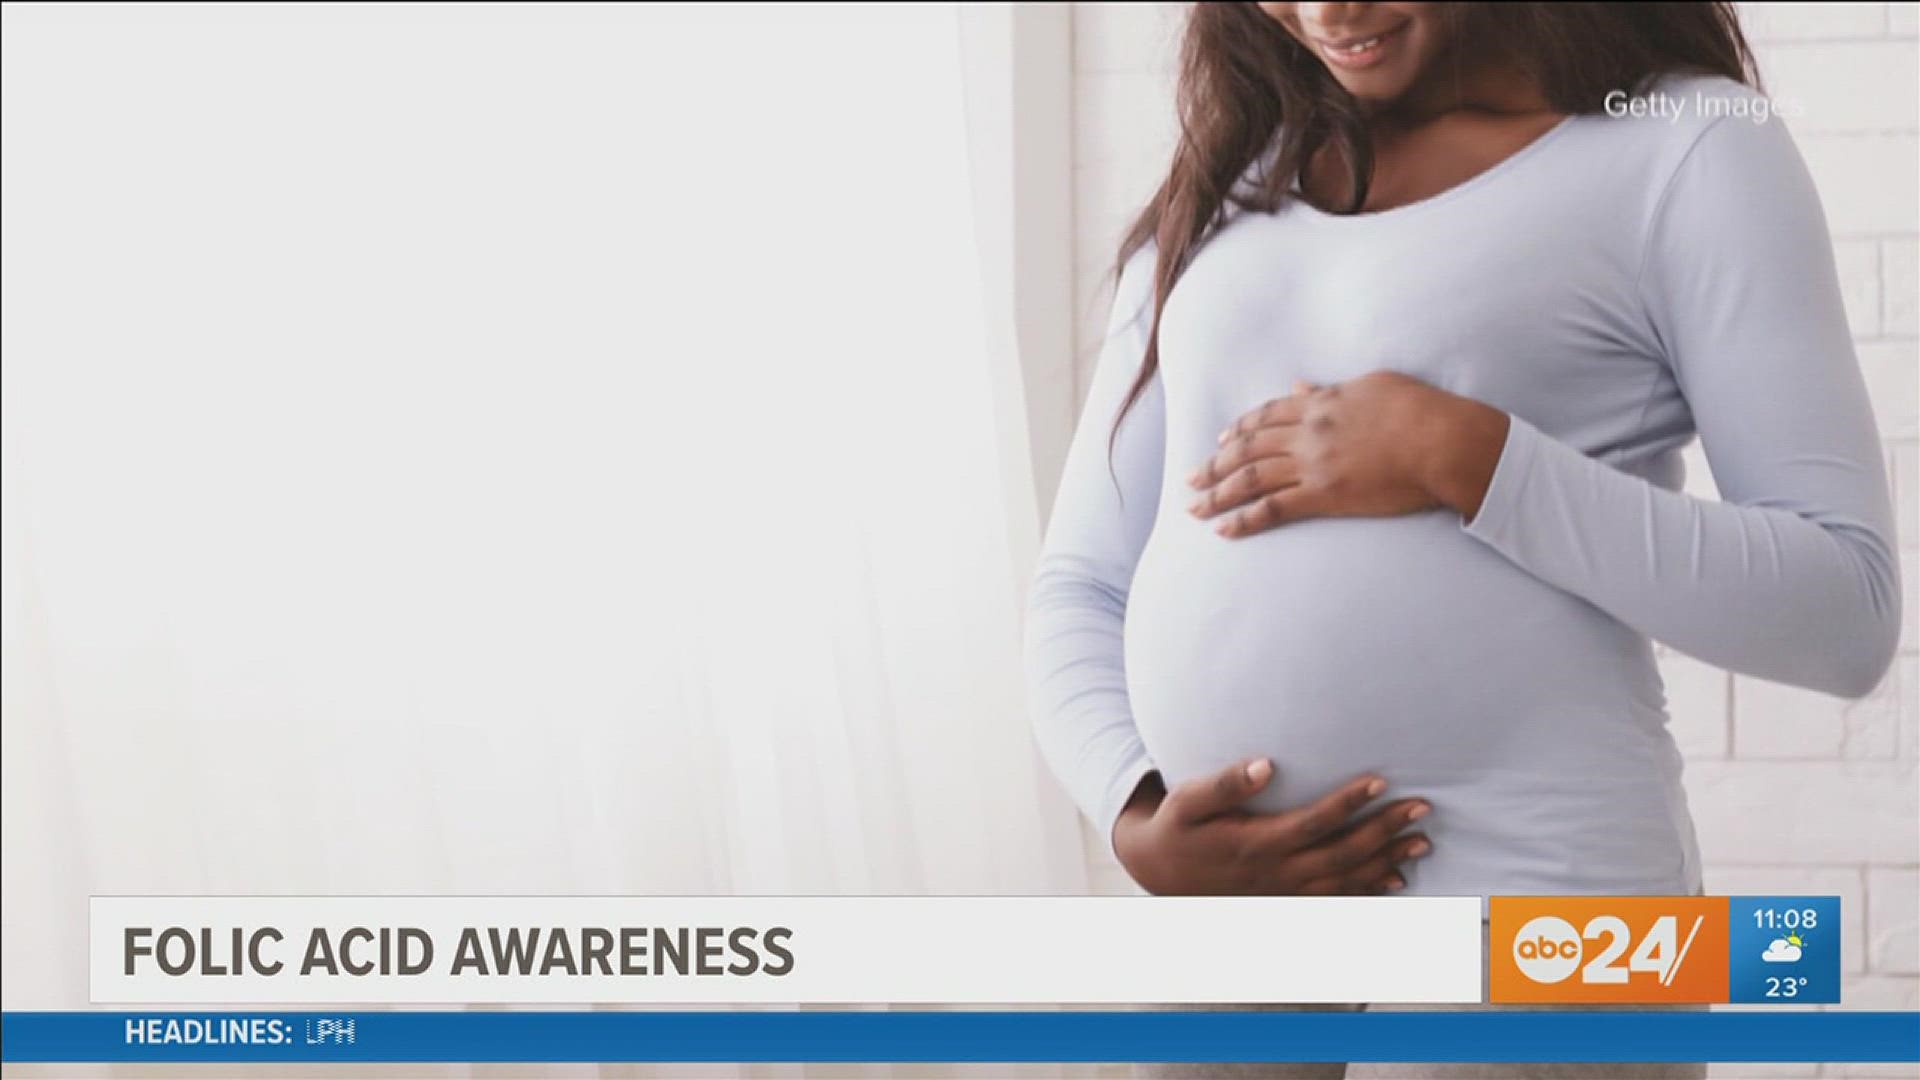 The CDC recommends getting 400mg of folic acid everyday to prevent brain or spine defects during pregnancy.